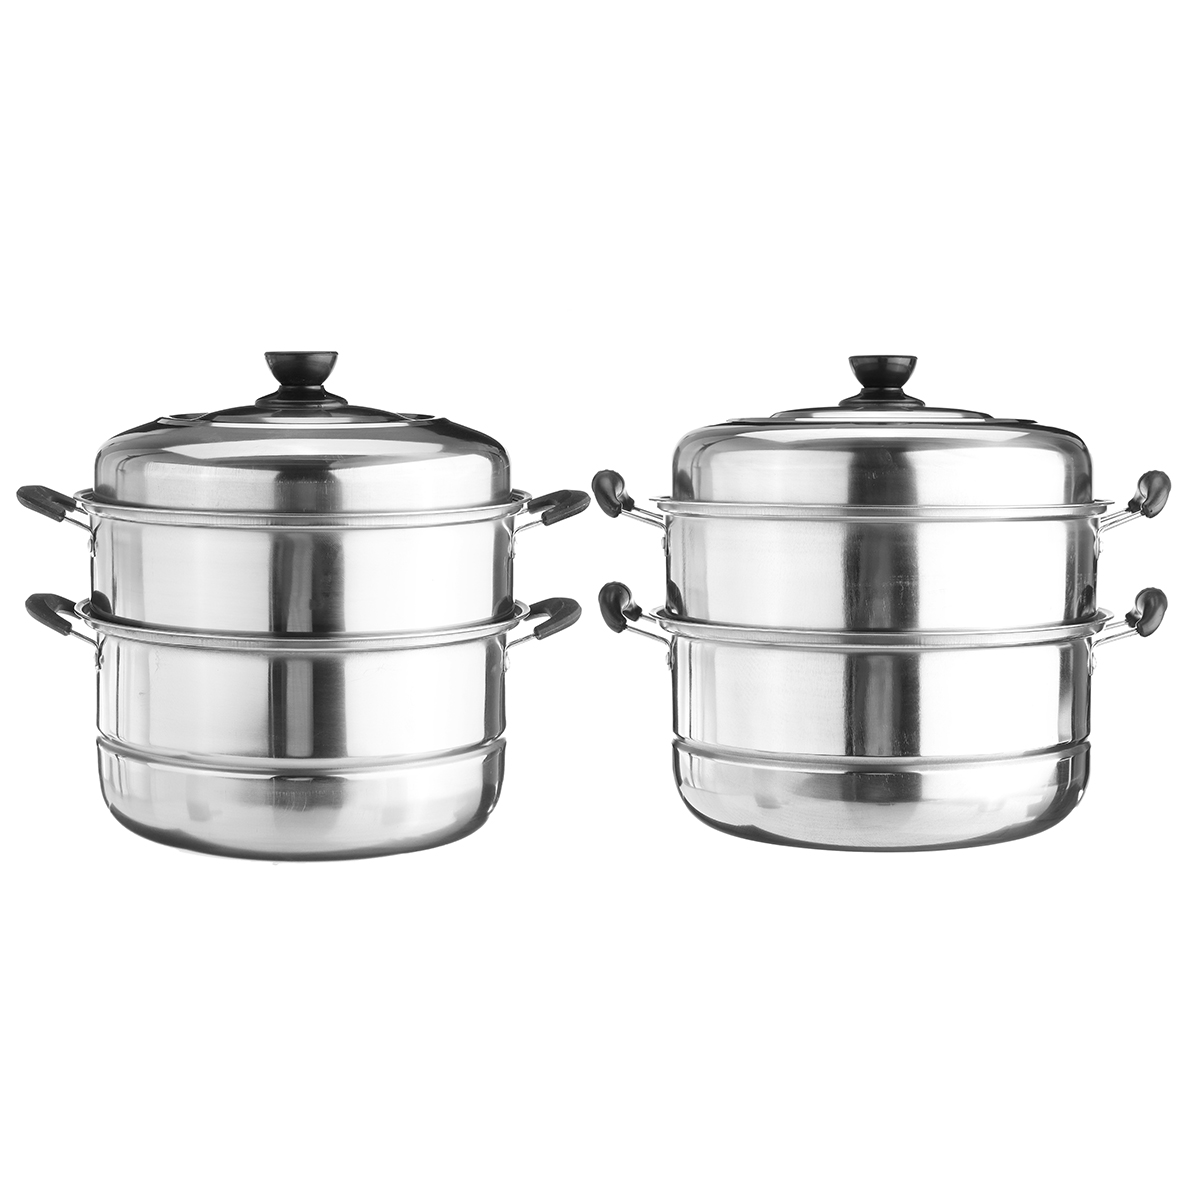 3-Tier-Stainless-Steel-Pot-Steamer-Steam-Cooking-Cooker-Cookware-Hot-Pot-Kitchen-Cooking-Tools-1672892-4